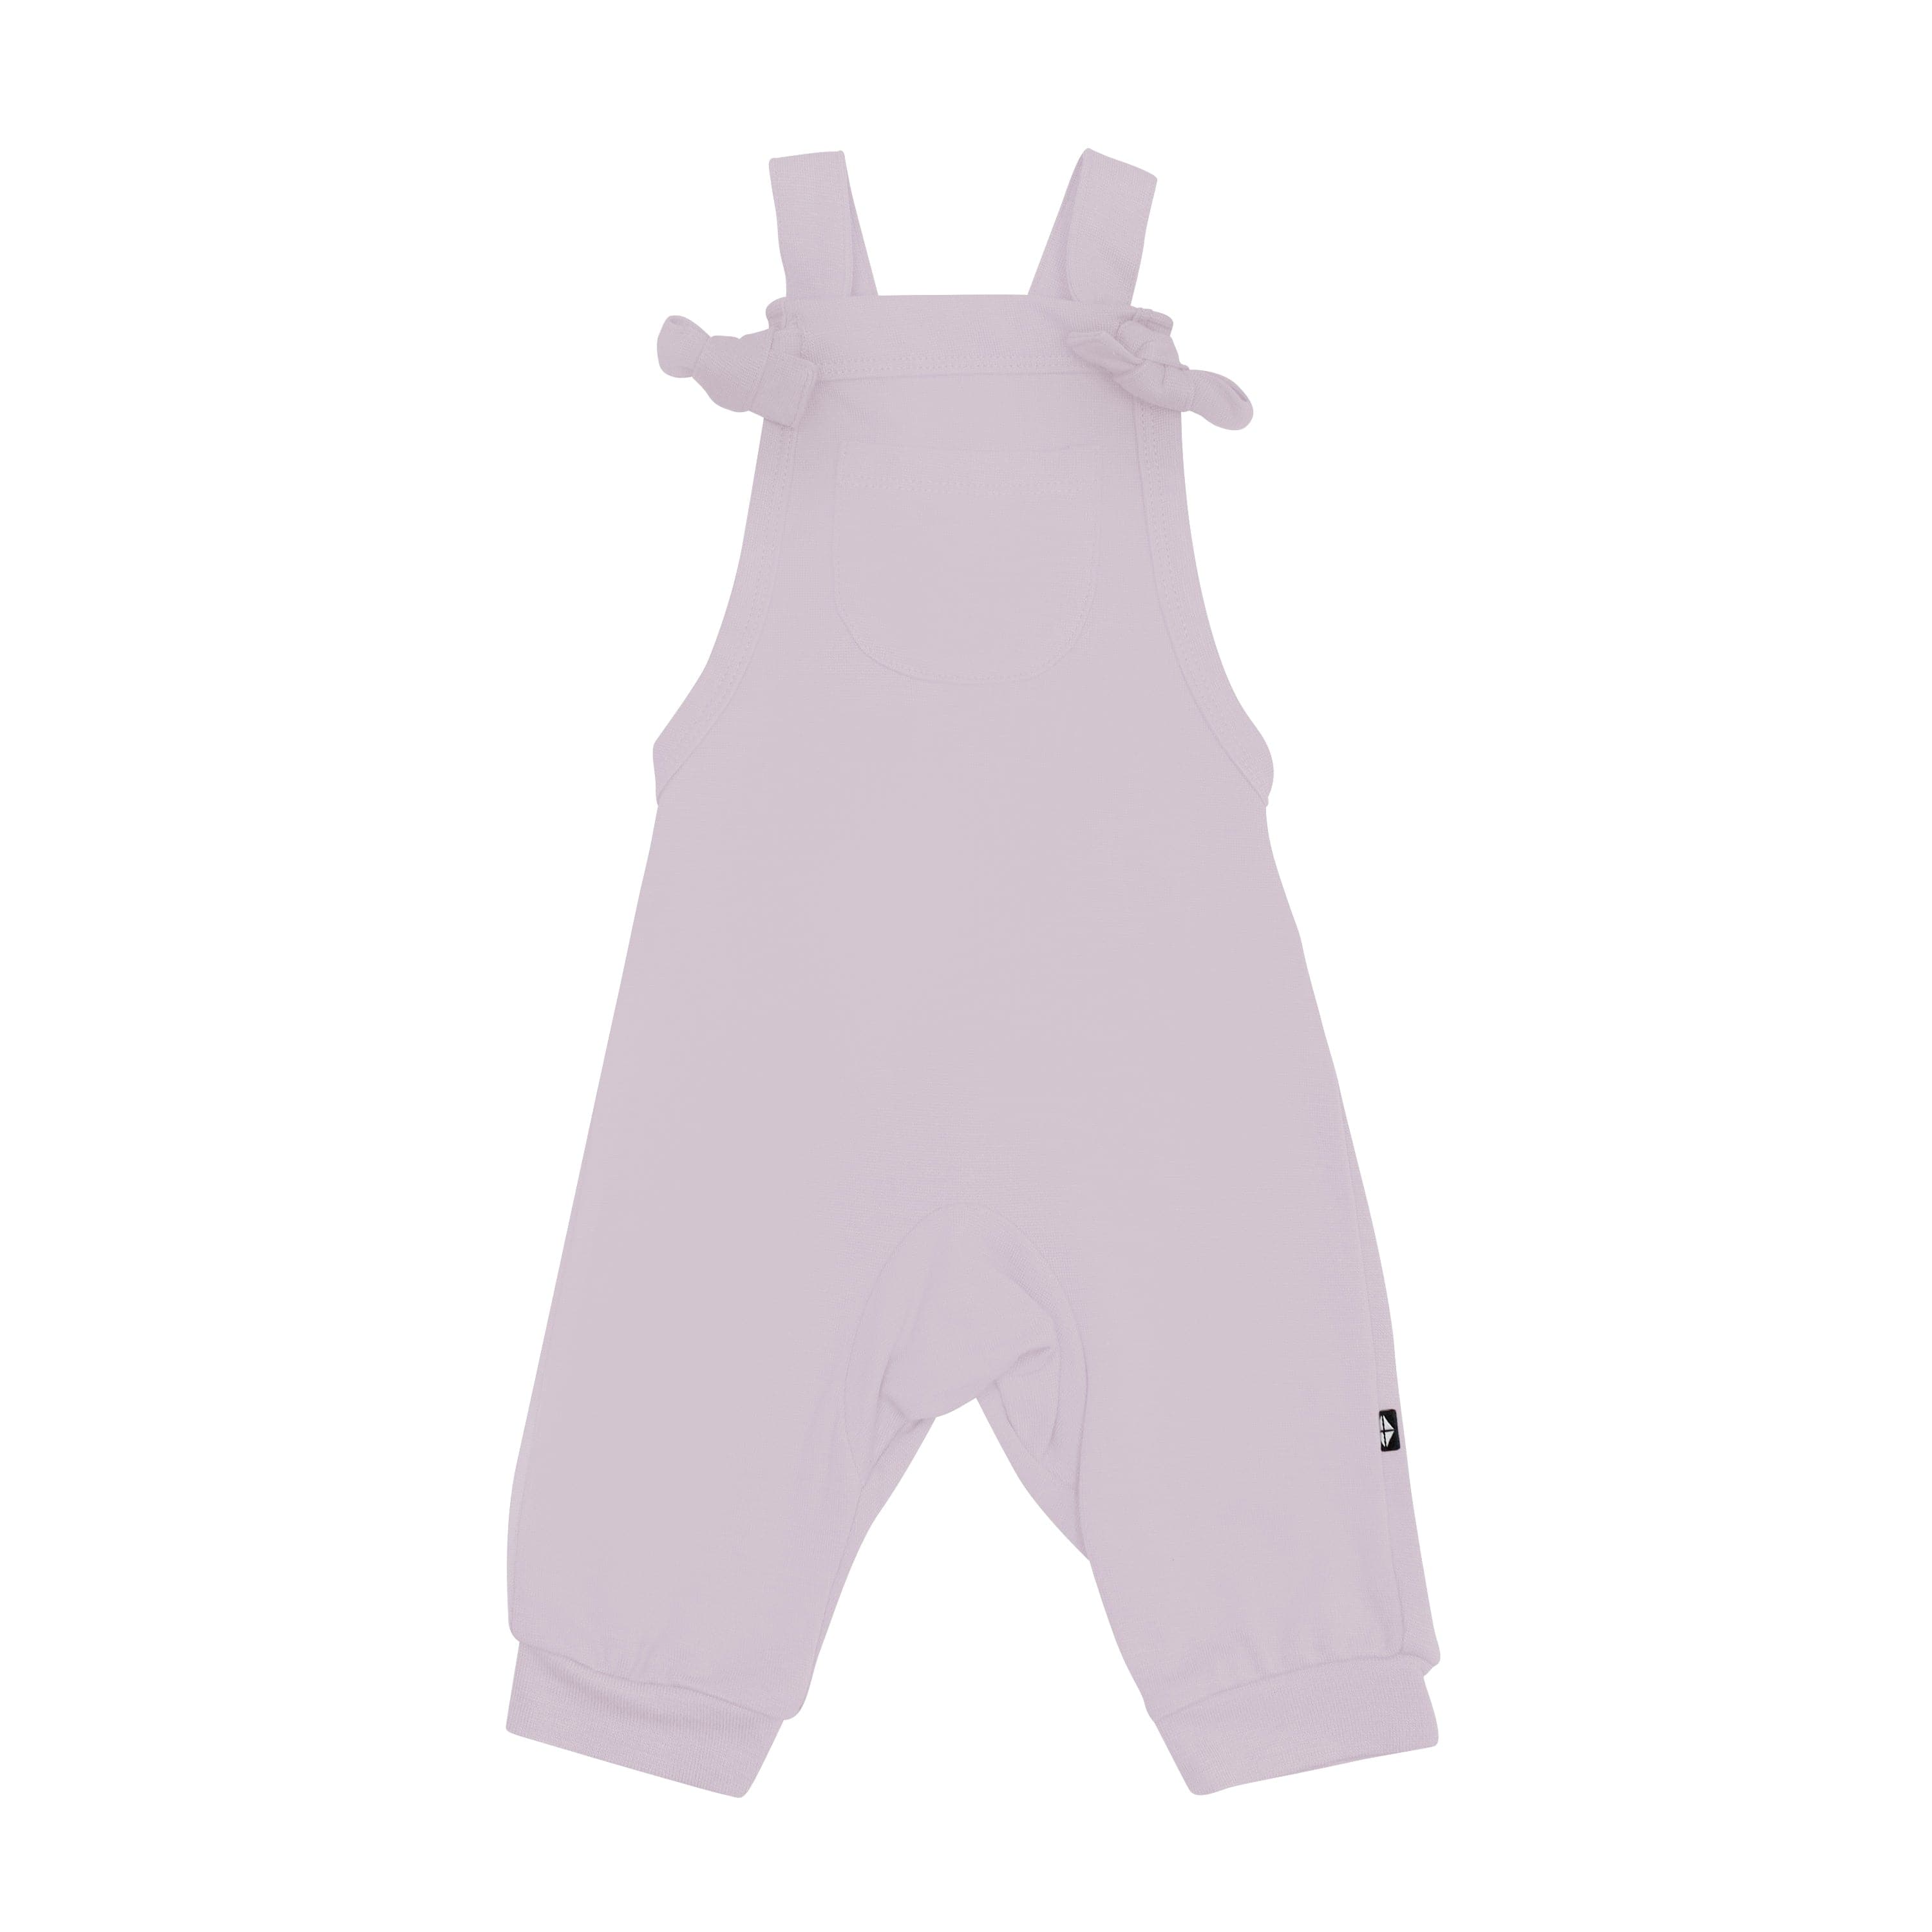 Kyte Baby Baby Overall Bamboo Jersey Overall in Wisteria